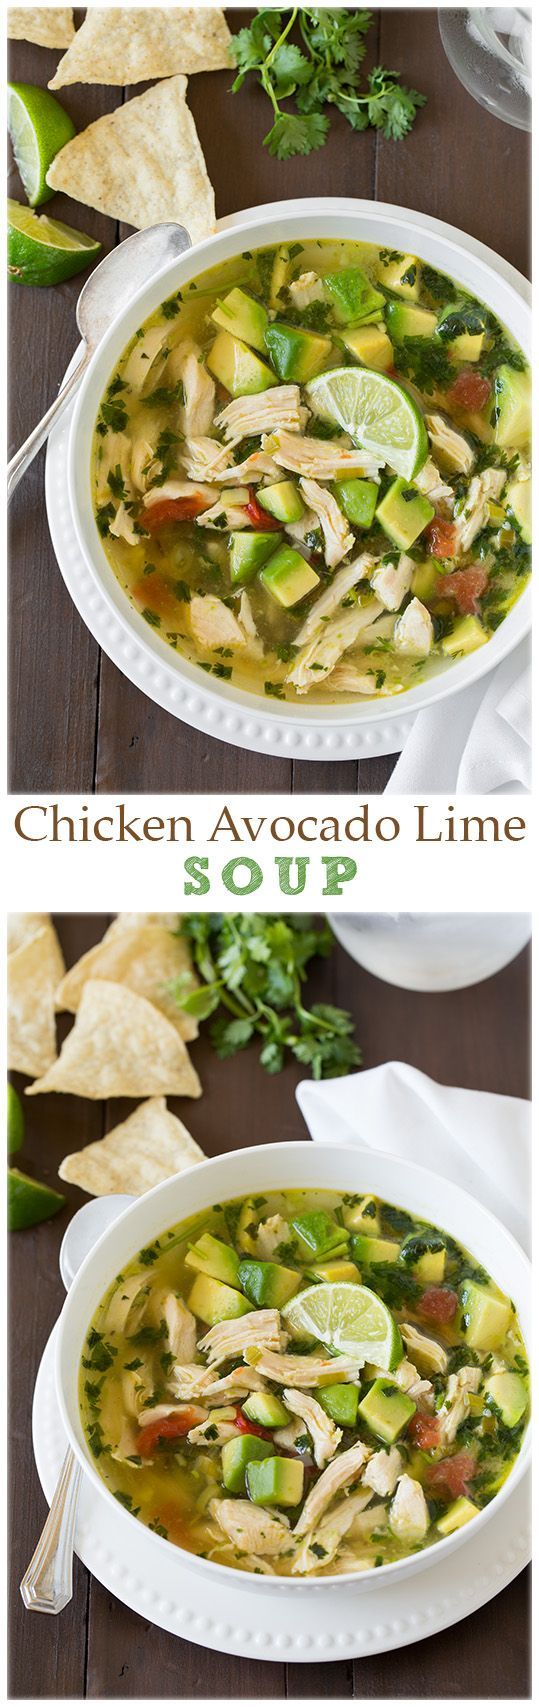 Chicken Avocado Lime Soup – this soup is AMAZING! Its basically chicken tortilla soup but with tons of avocados.